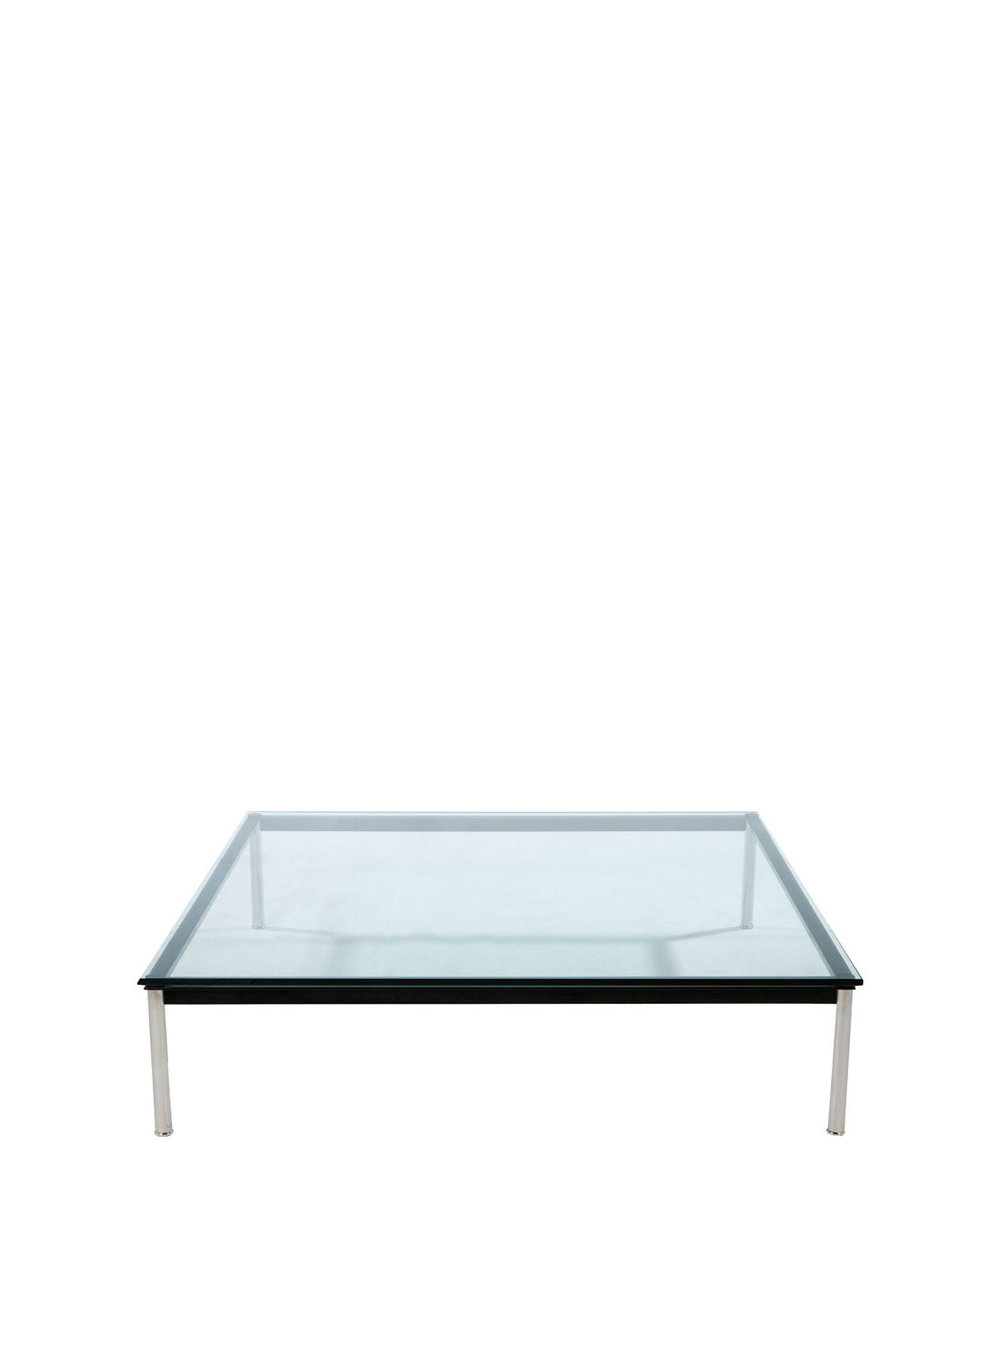 Corbusier Style Coffee Table Ireland Exclusive Ca Design intended for measurements 1000 X 1364